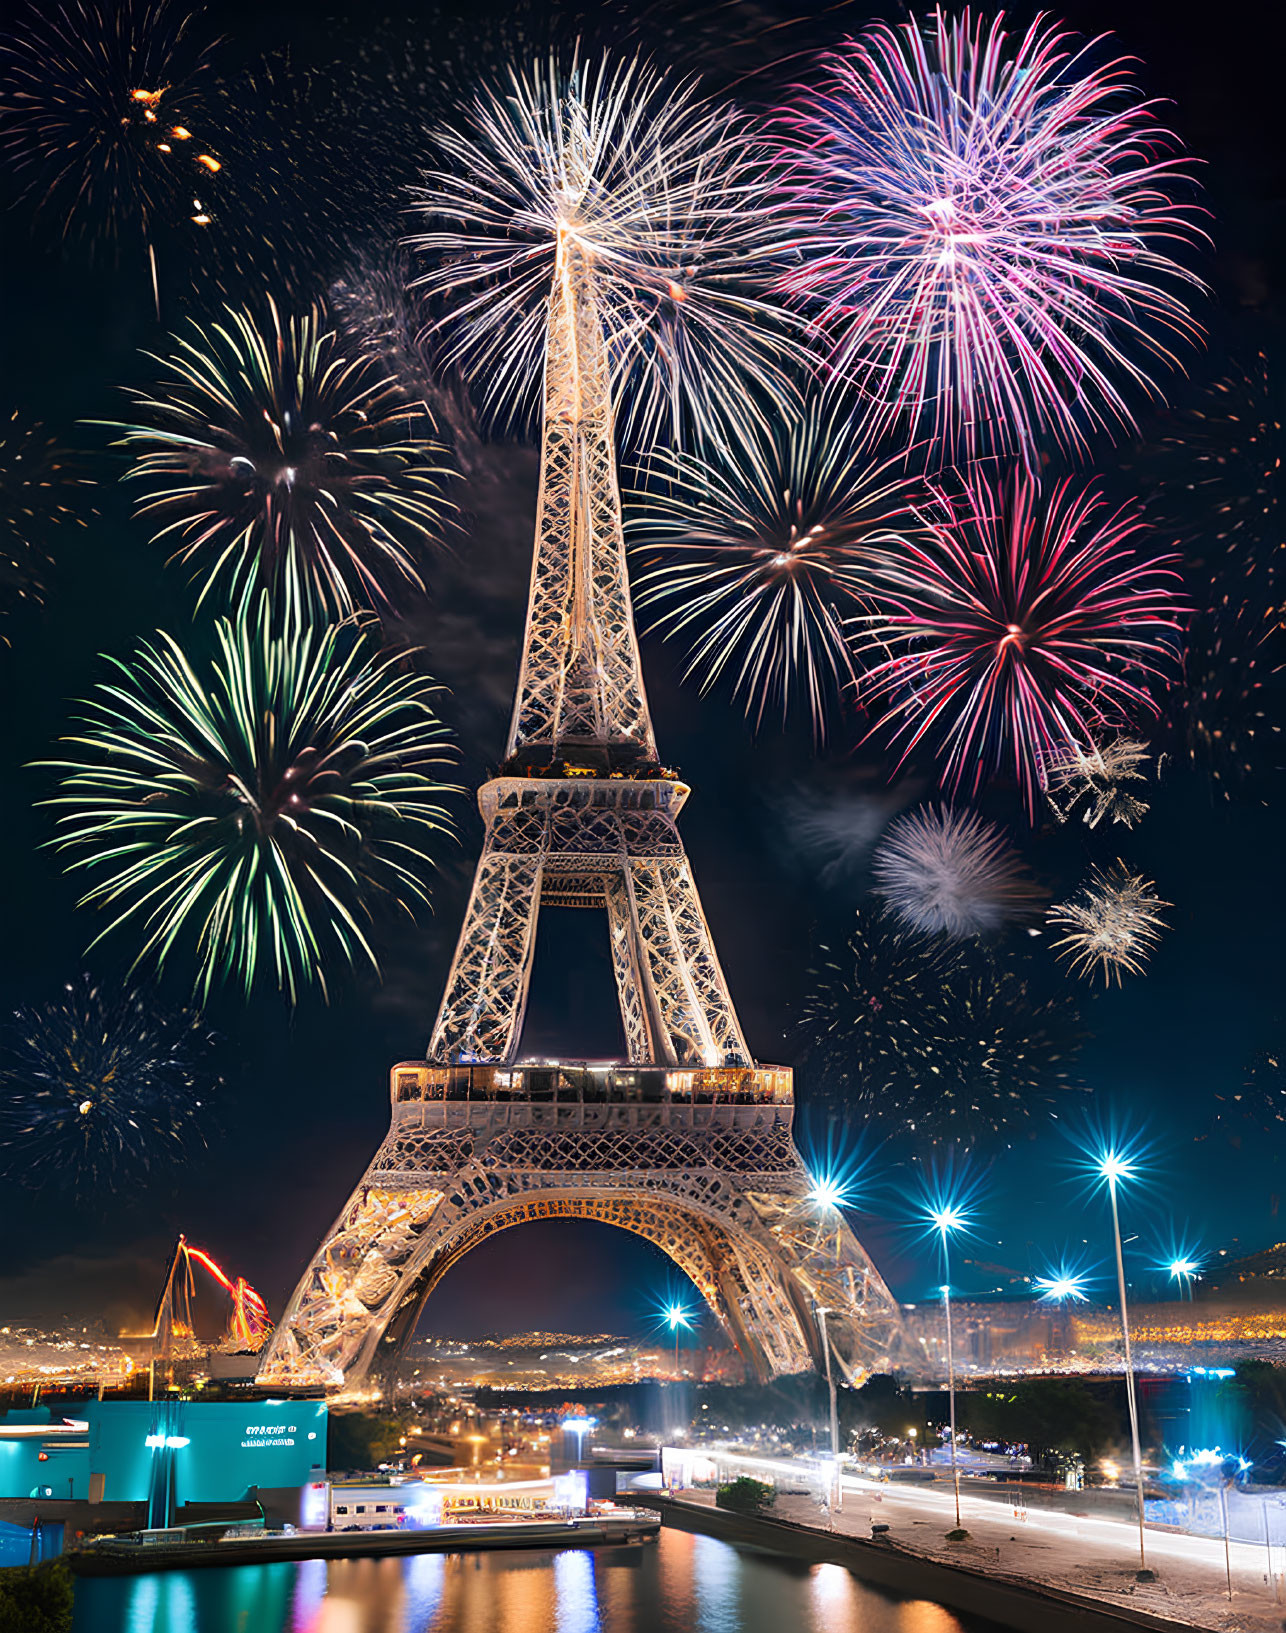 Iconic Eiffel Tower Night Scene with Colorful Fireworks